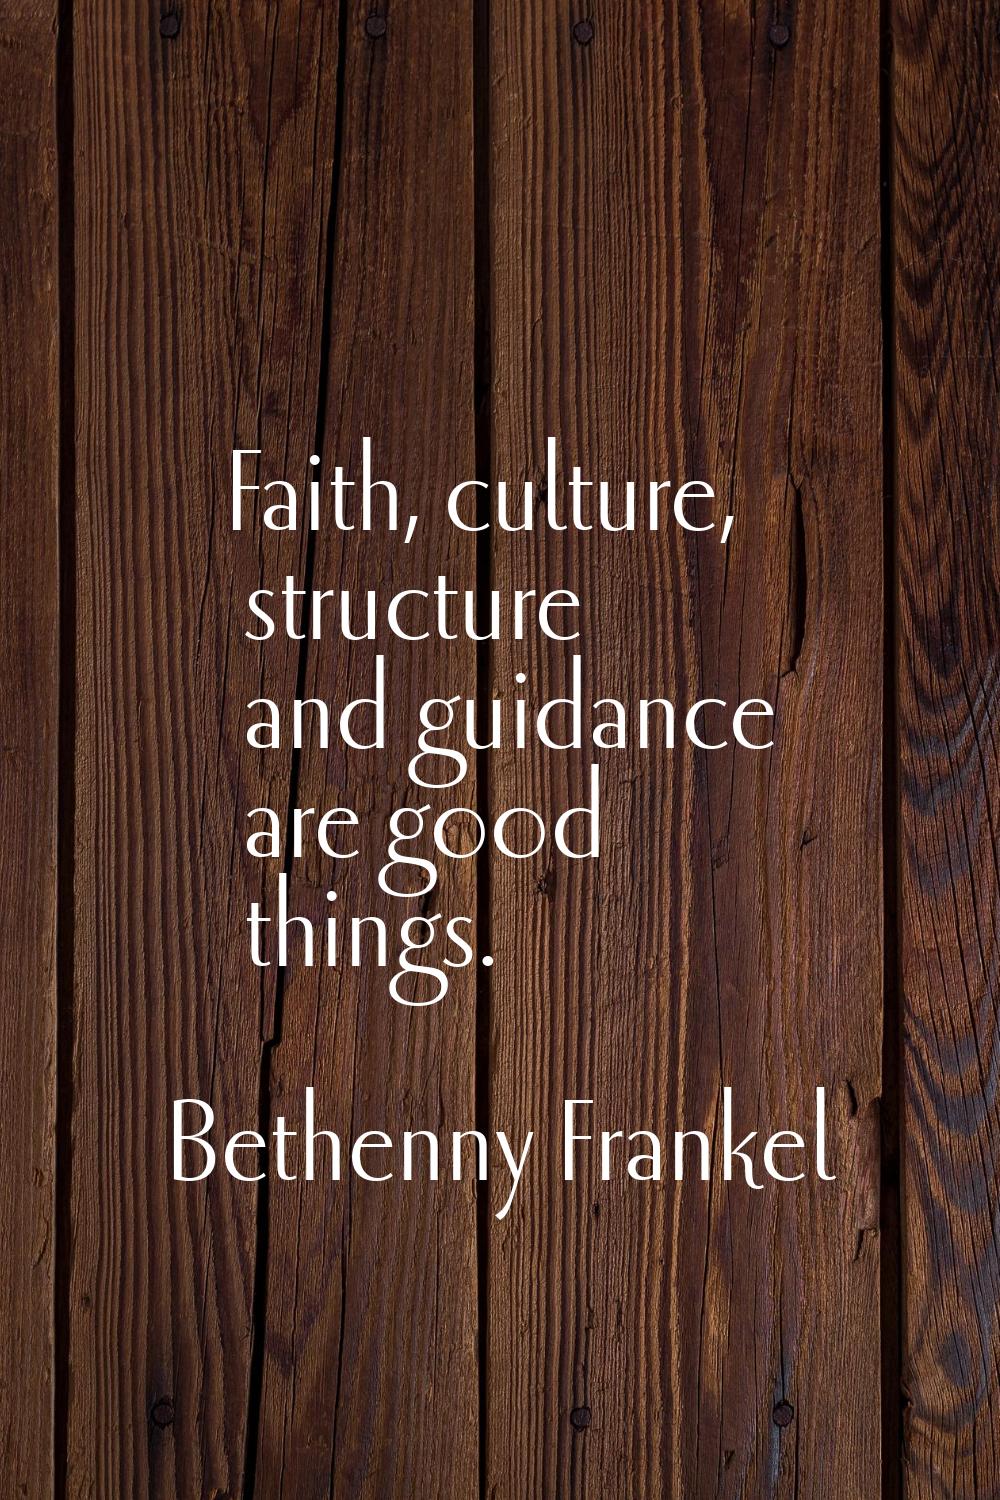 Faith, culture, structure and guidance are good things.